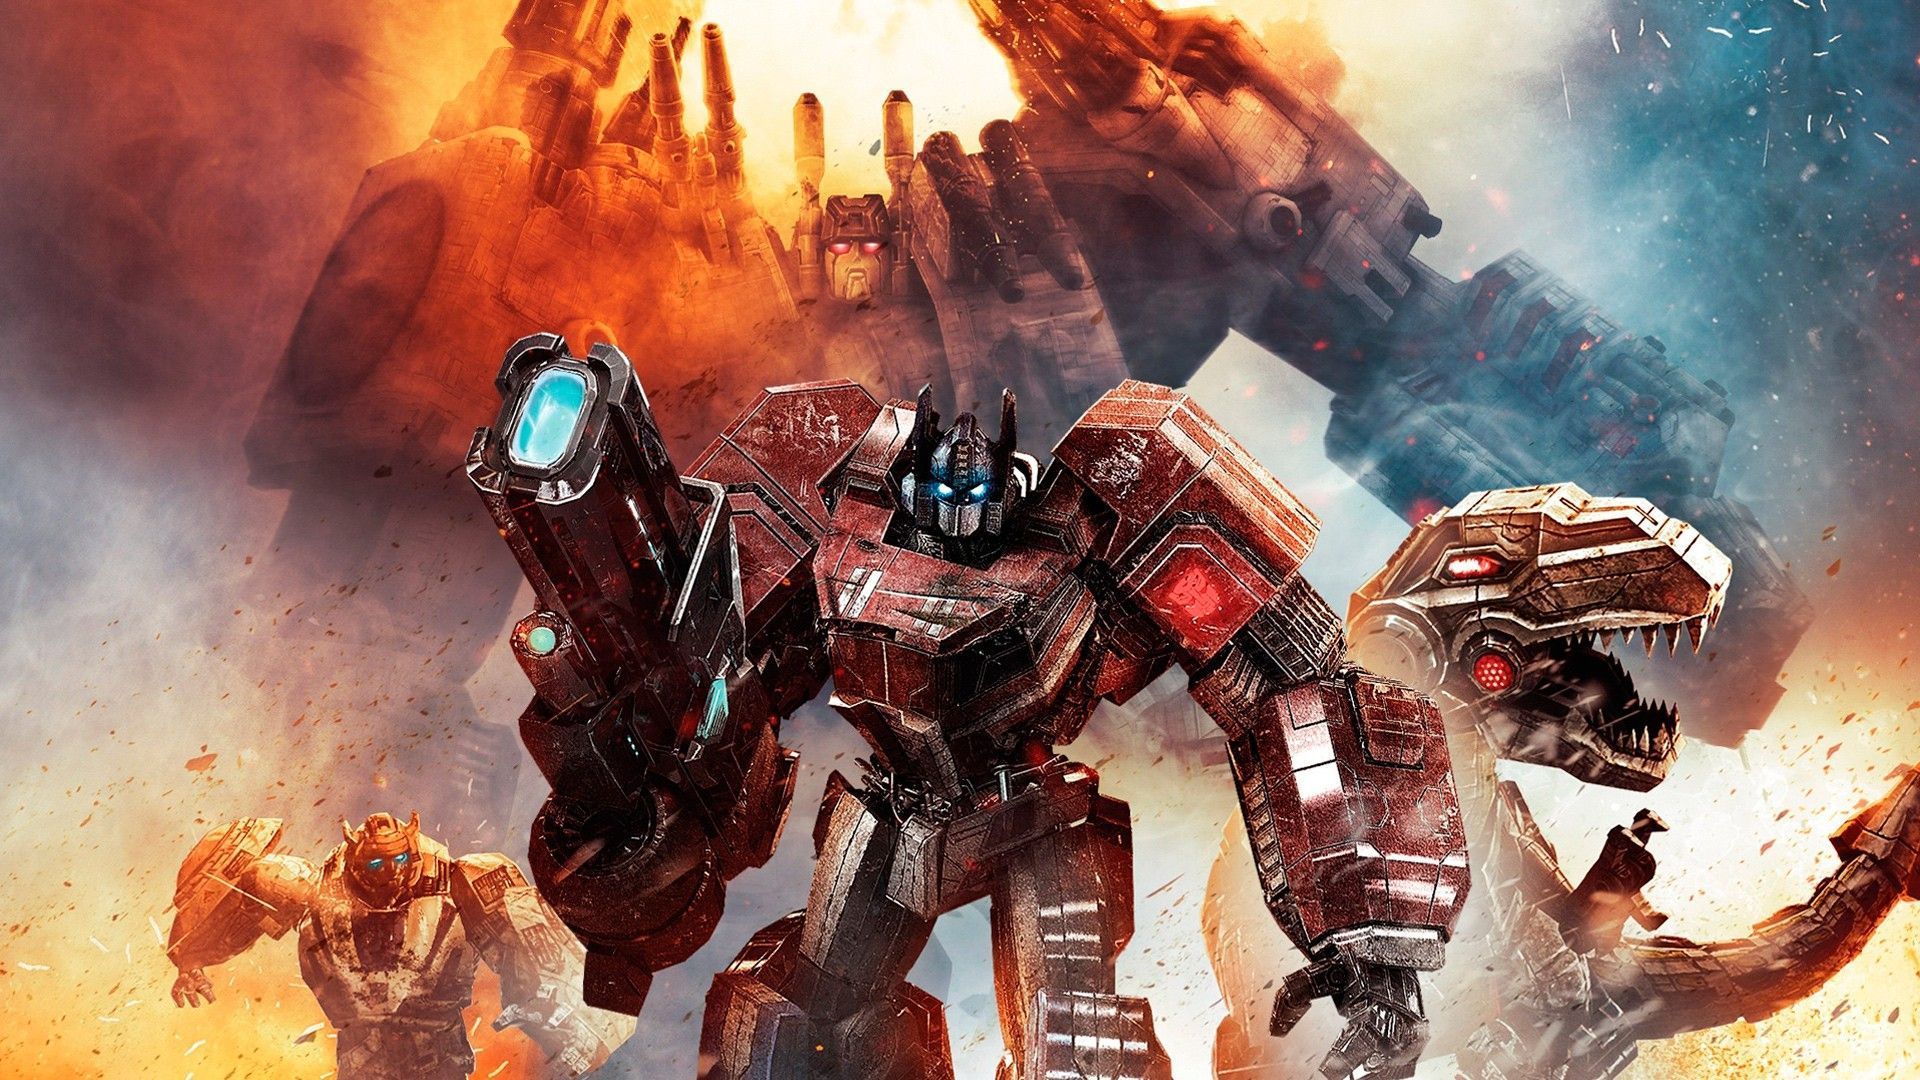 Download Optimus Prime Wallpaper HD #excor » hdxwallpaperz.com